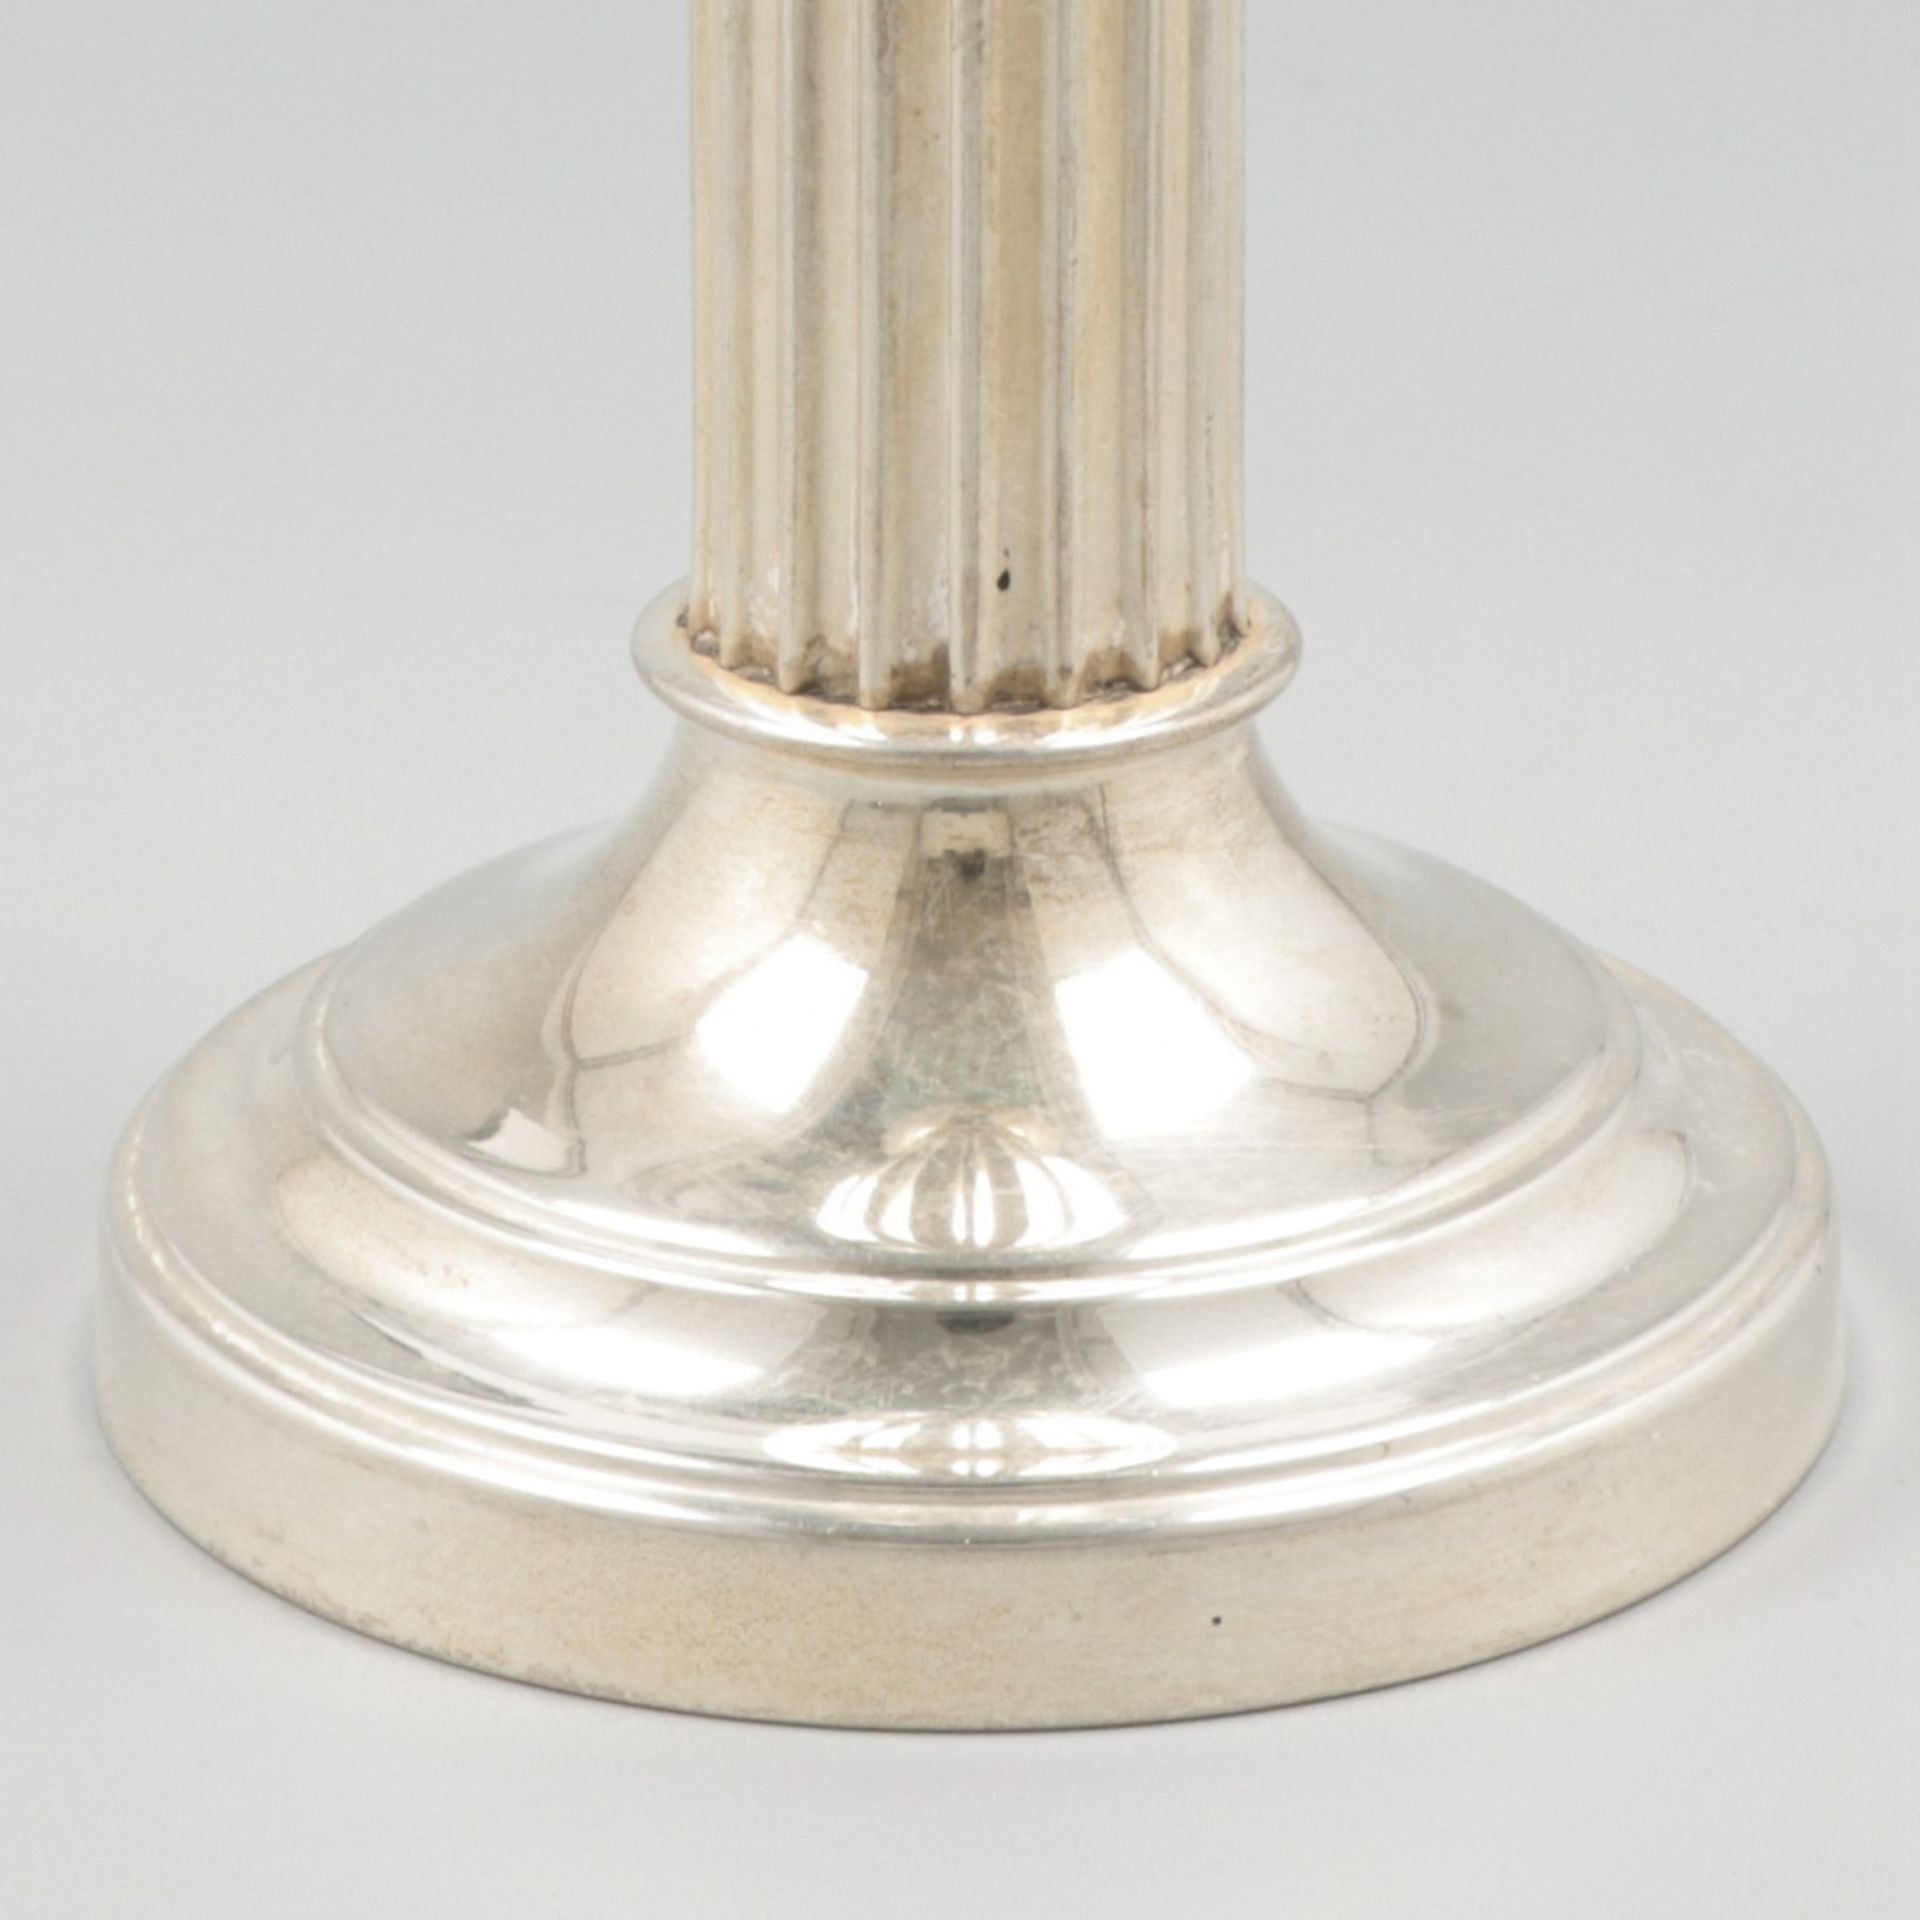 2-piece set of candlesticks silver. - Image 3 of 7